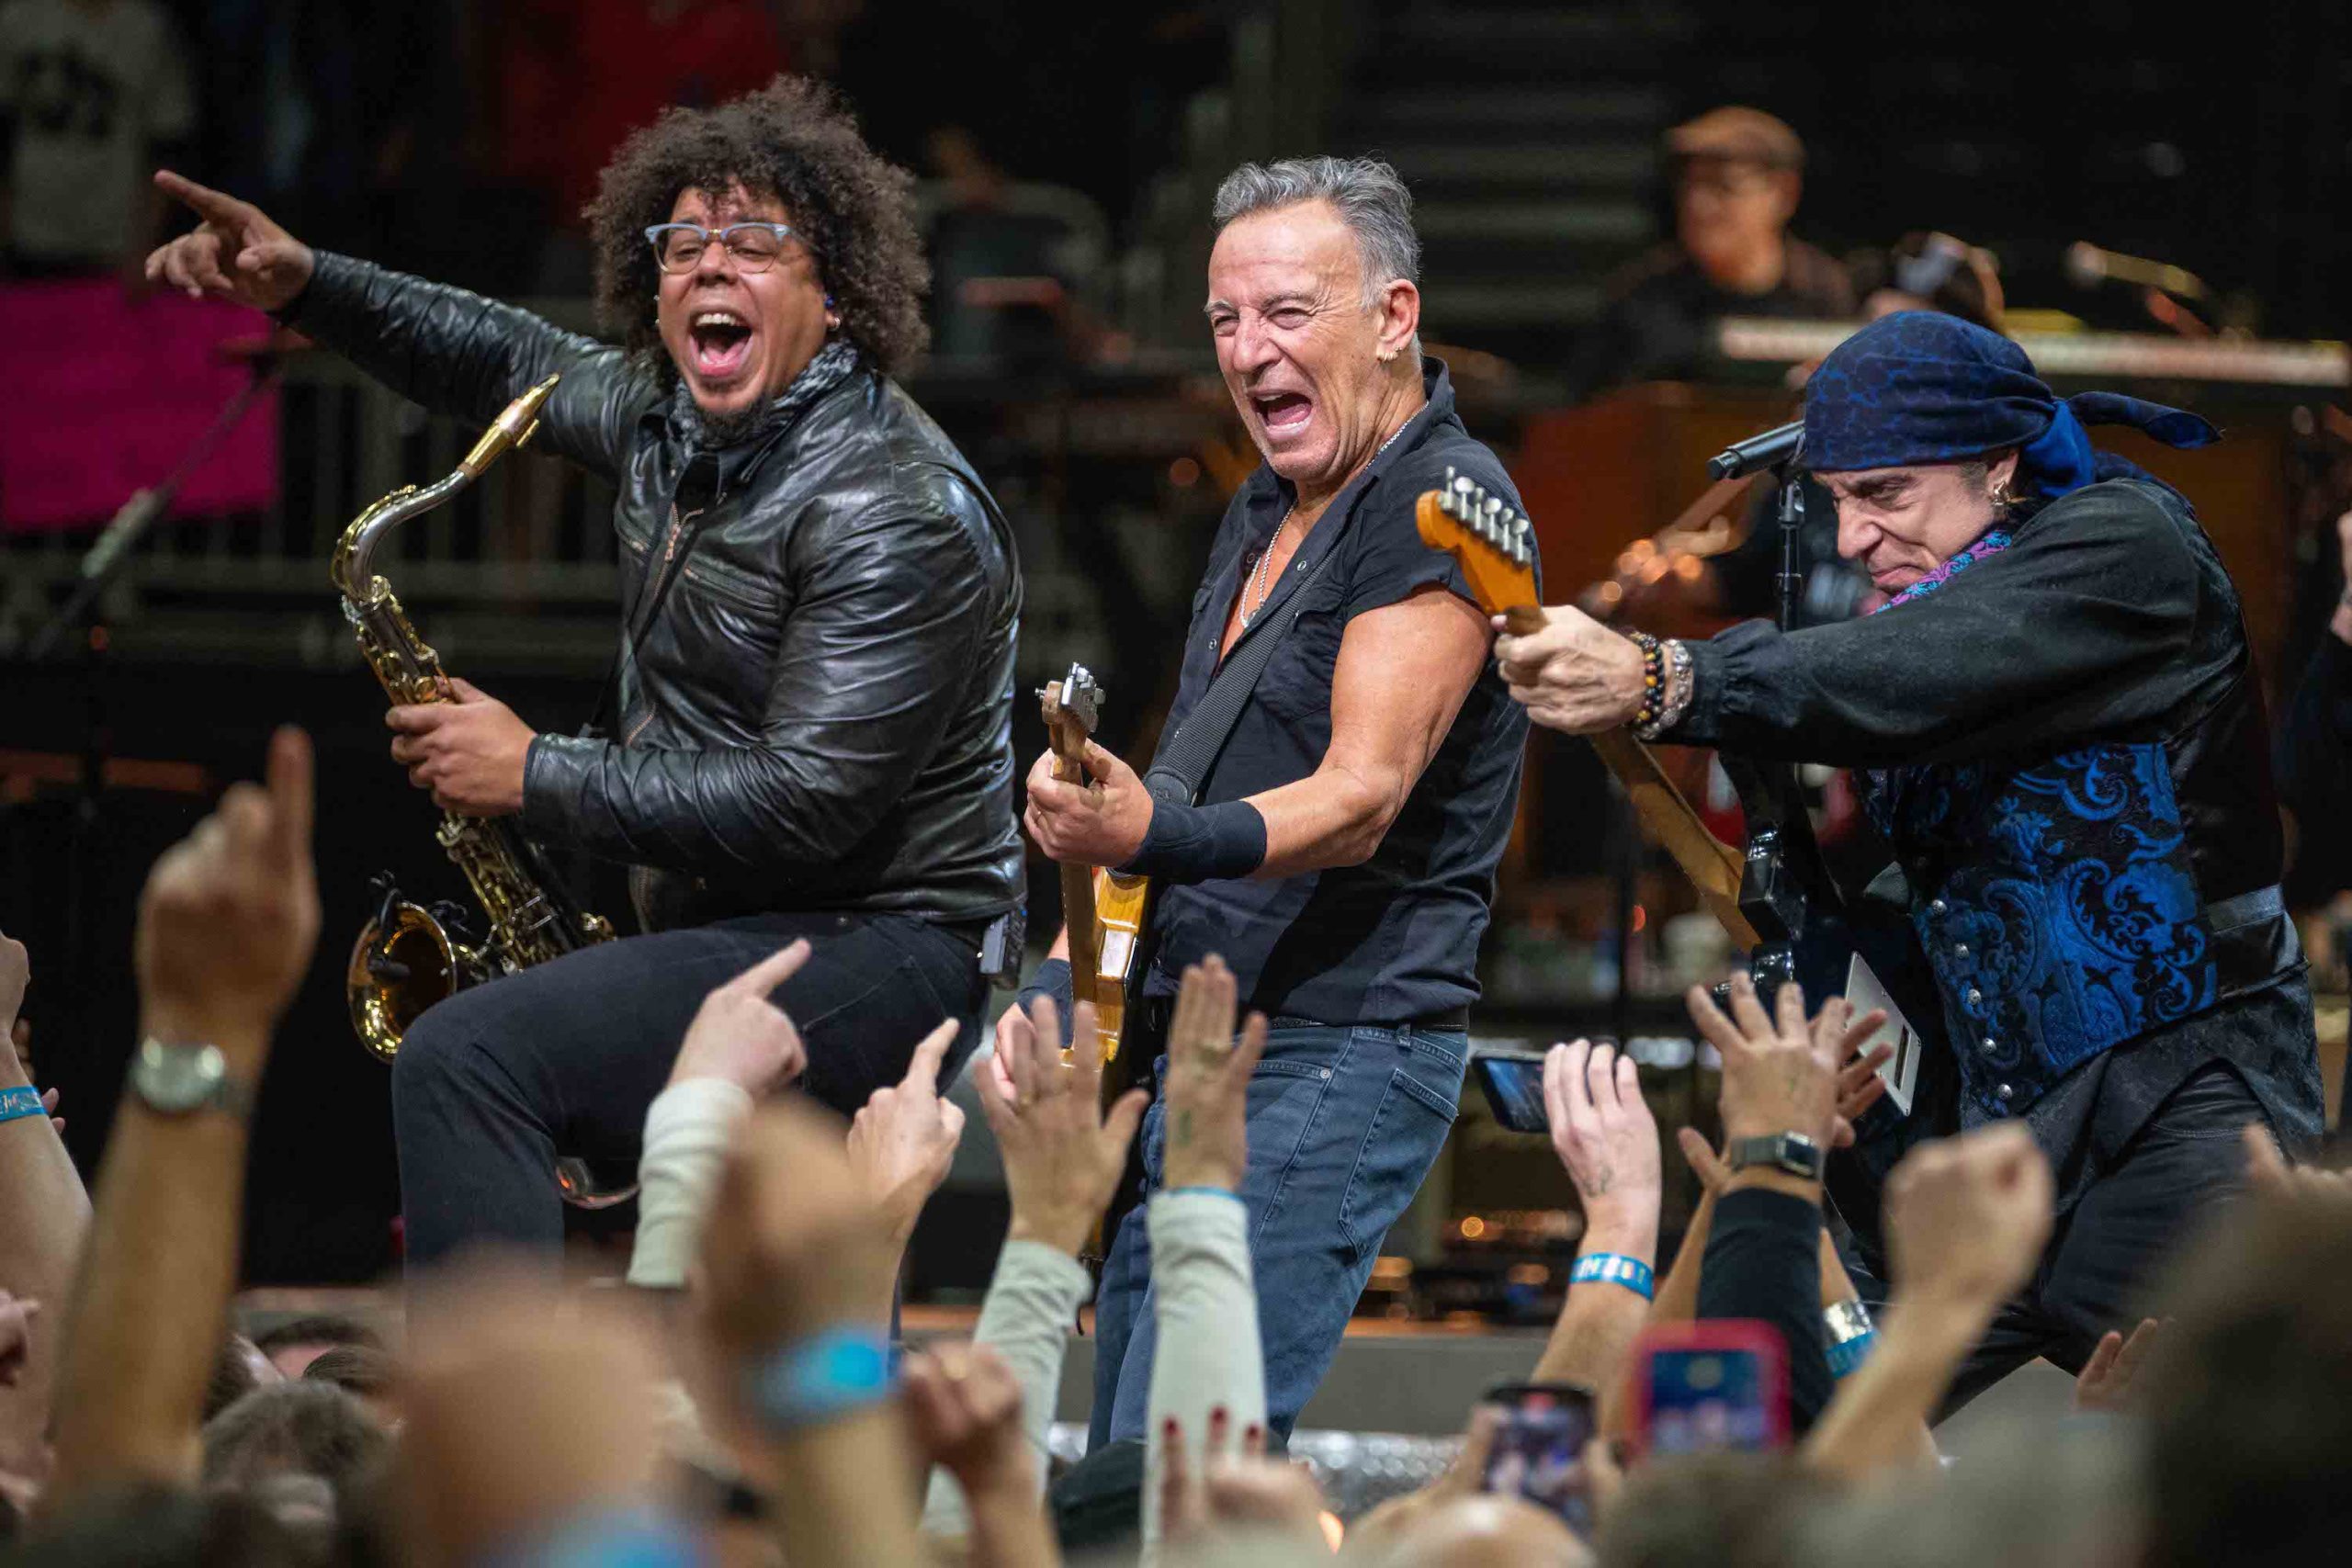 Bruce Springsteen & E Street Band at Fiserv Forum, Milwaukee, Wisconsin on March 7, 2023.